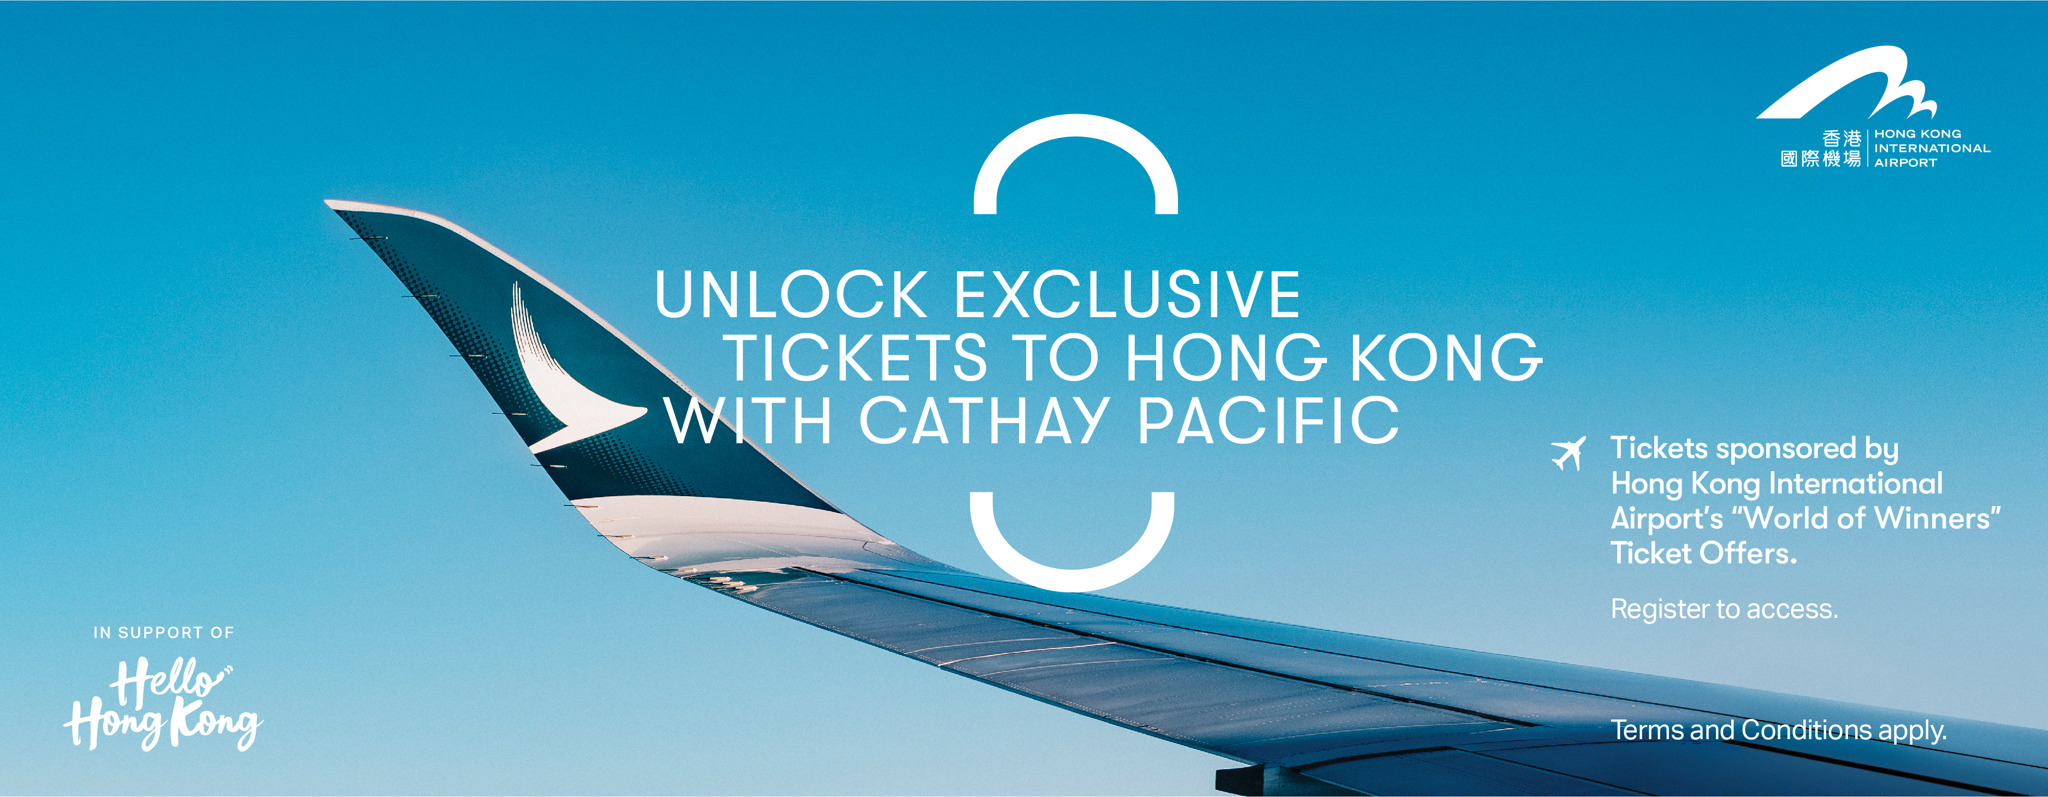 Get Free Roundtrip Flights To Hong Kong On Cathay Pacific